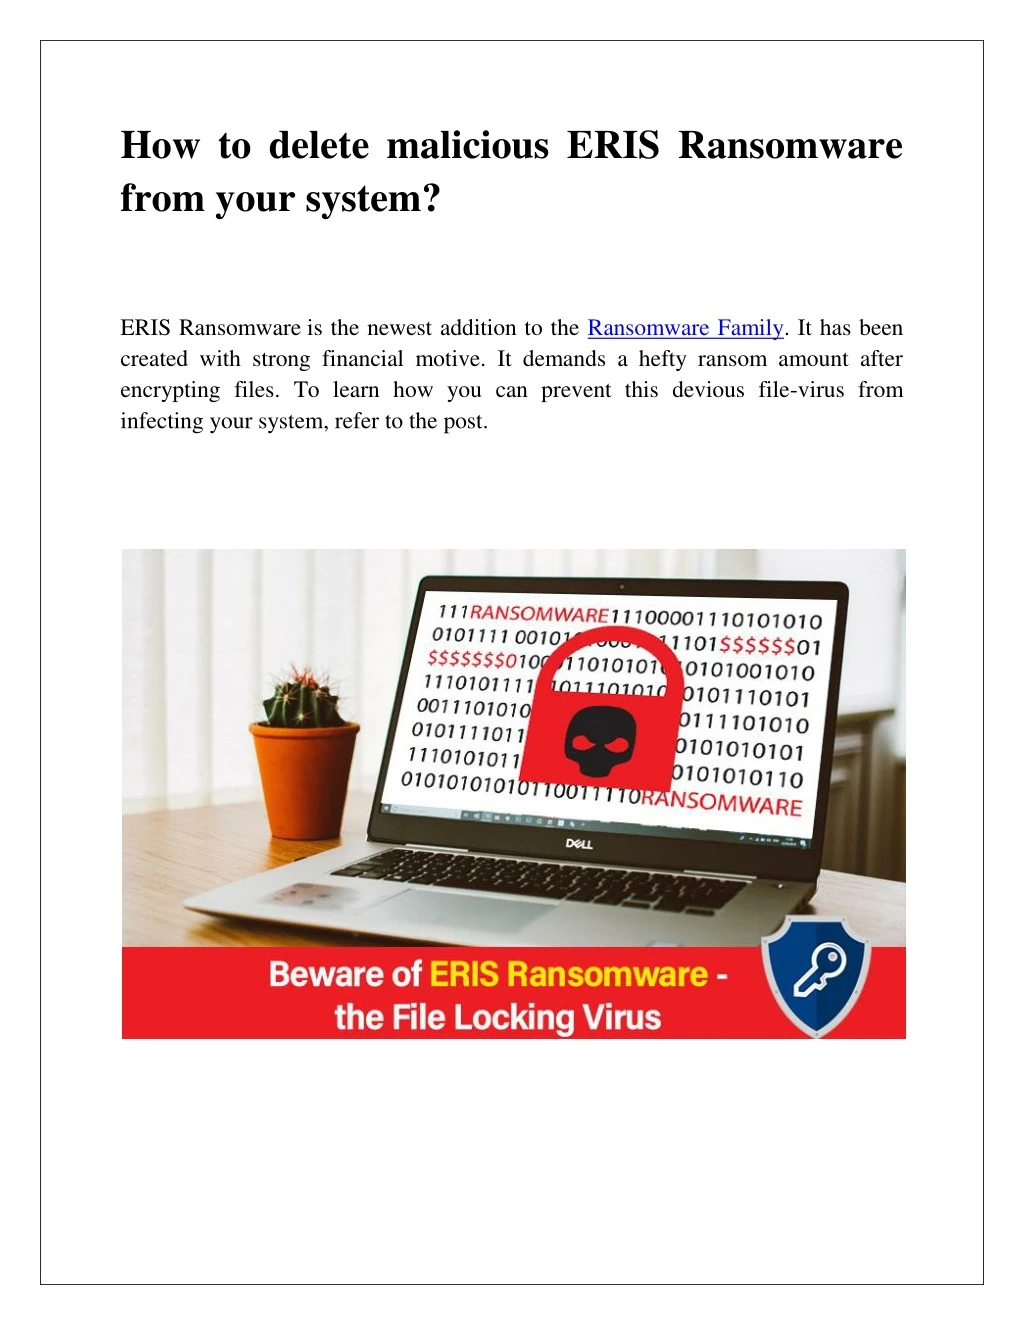 how to delete malicious eris ransomware from your